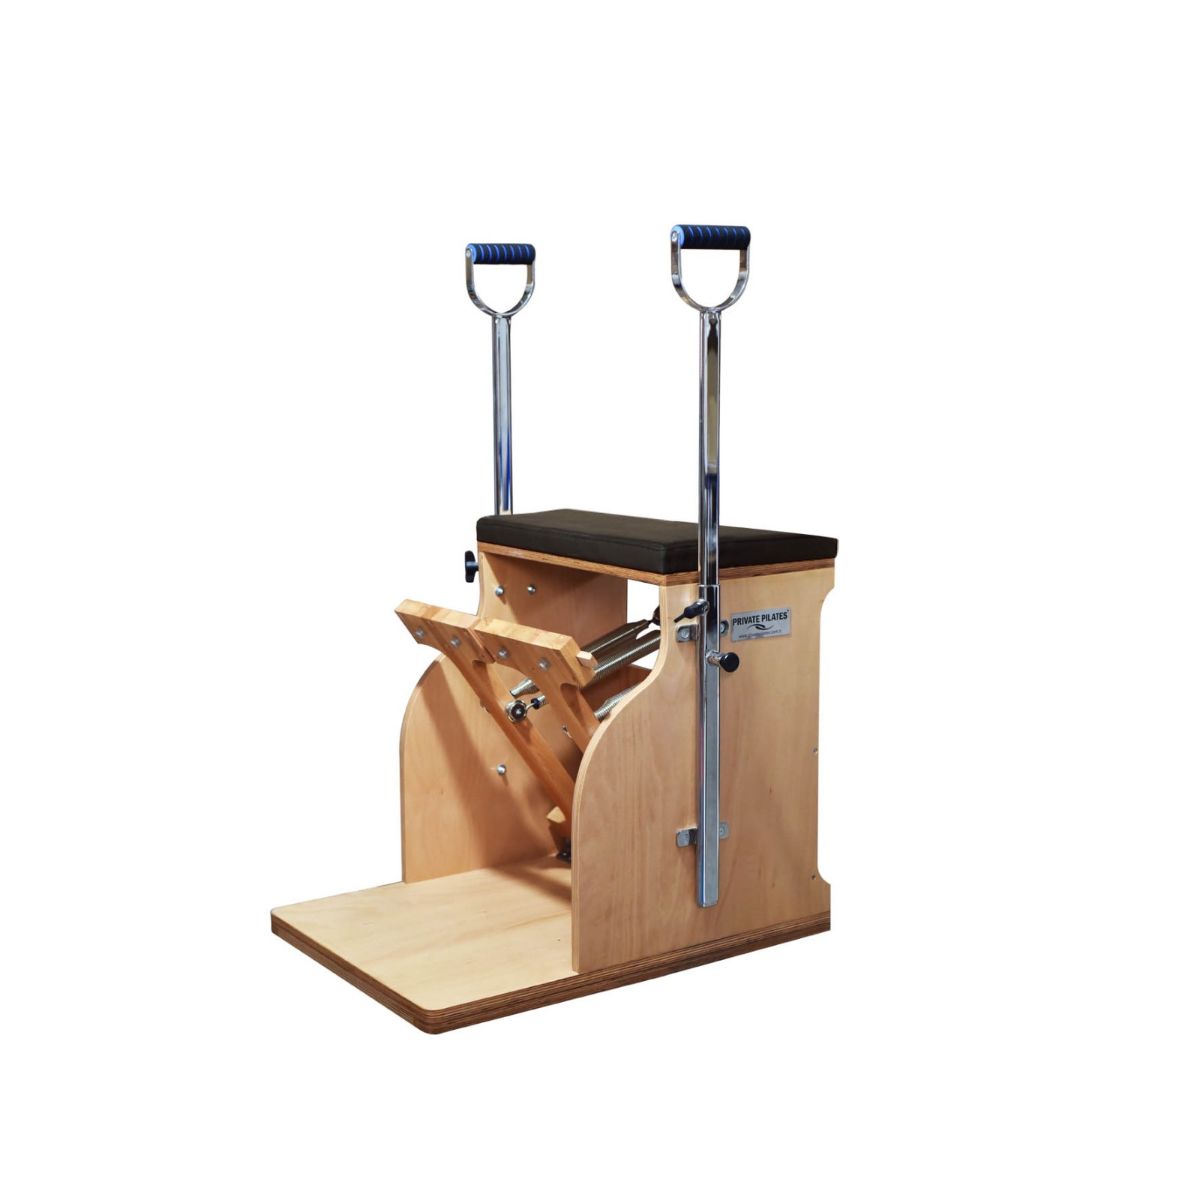 Buy Private Pilates Premium Combo Chair with Free Shipping